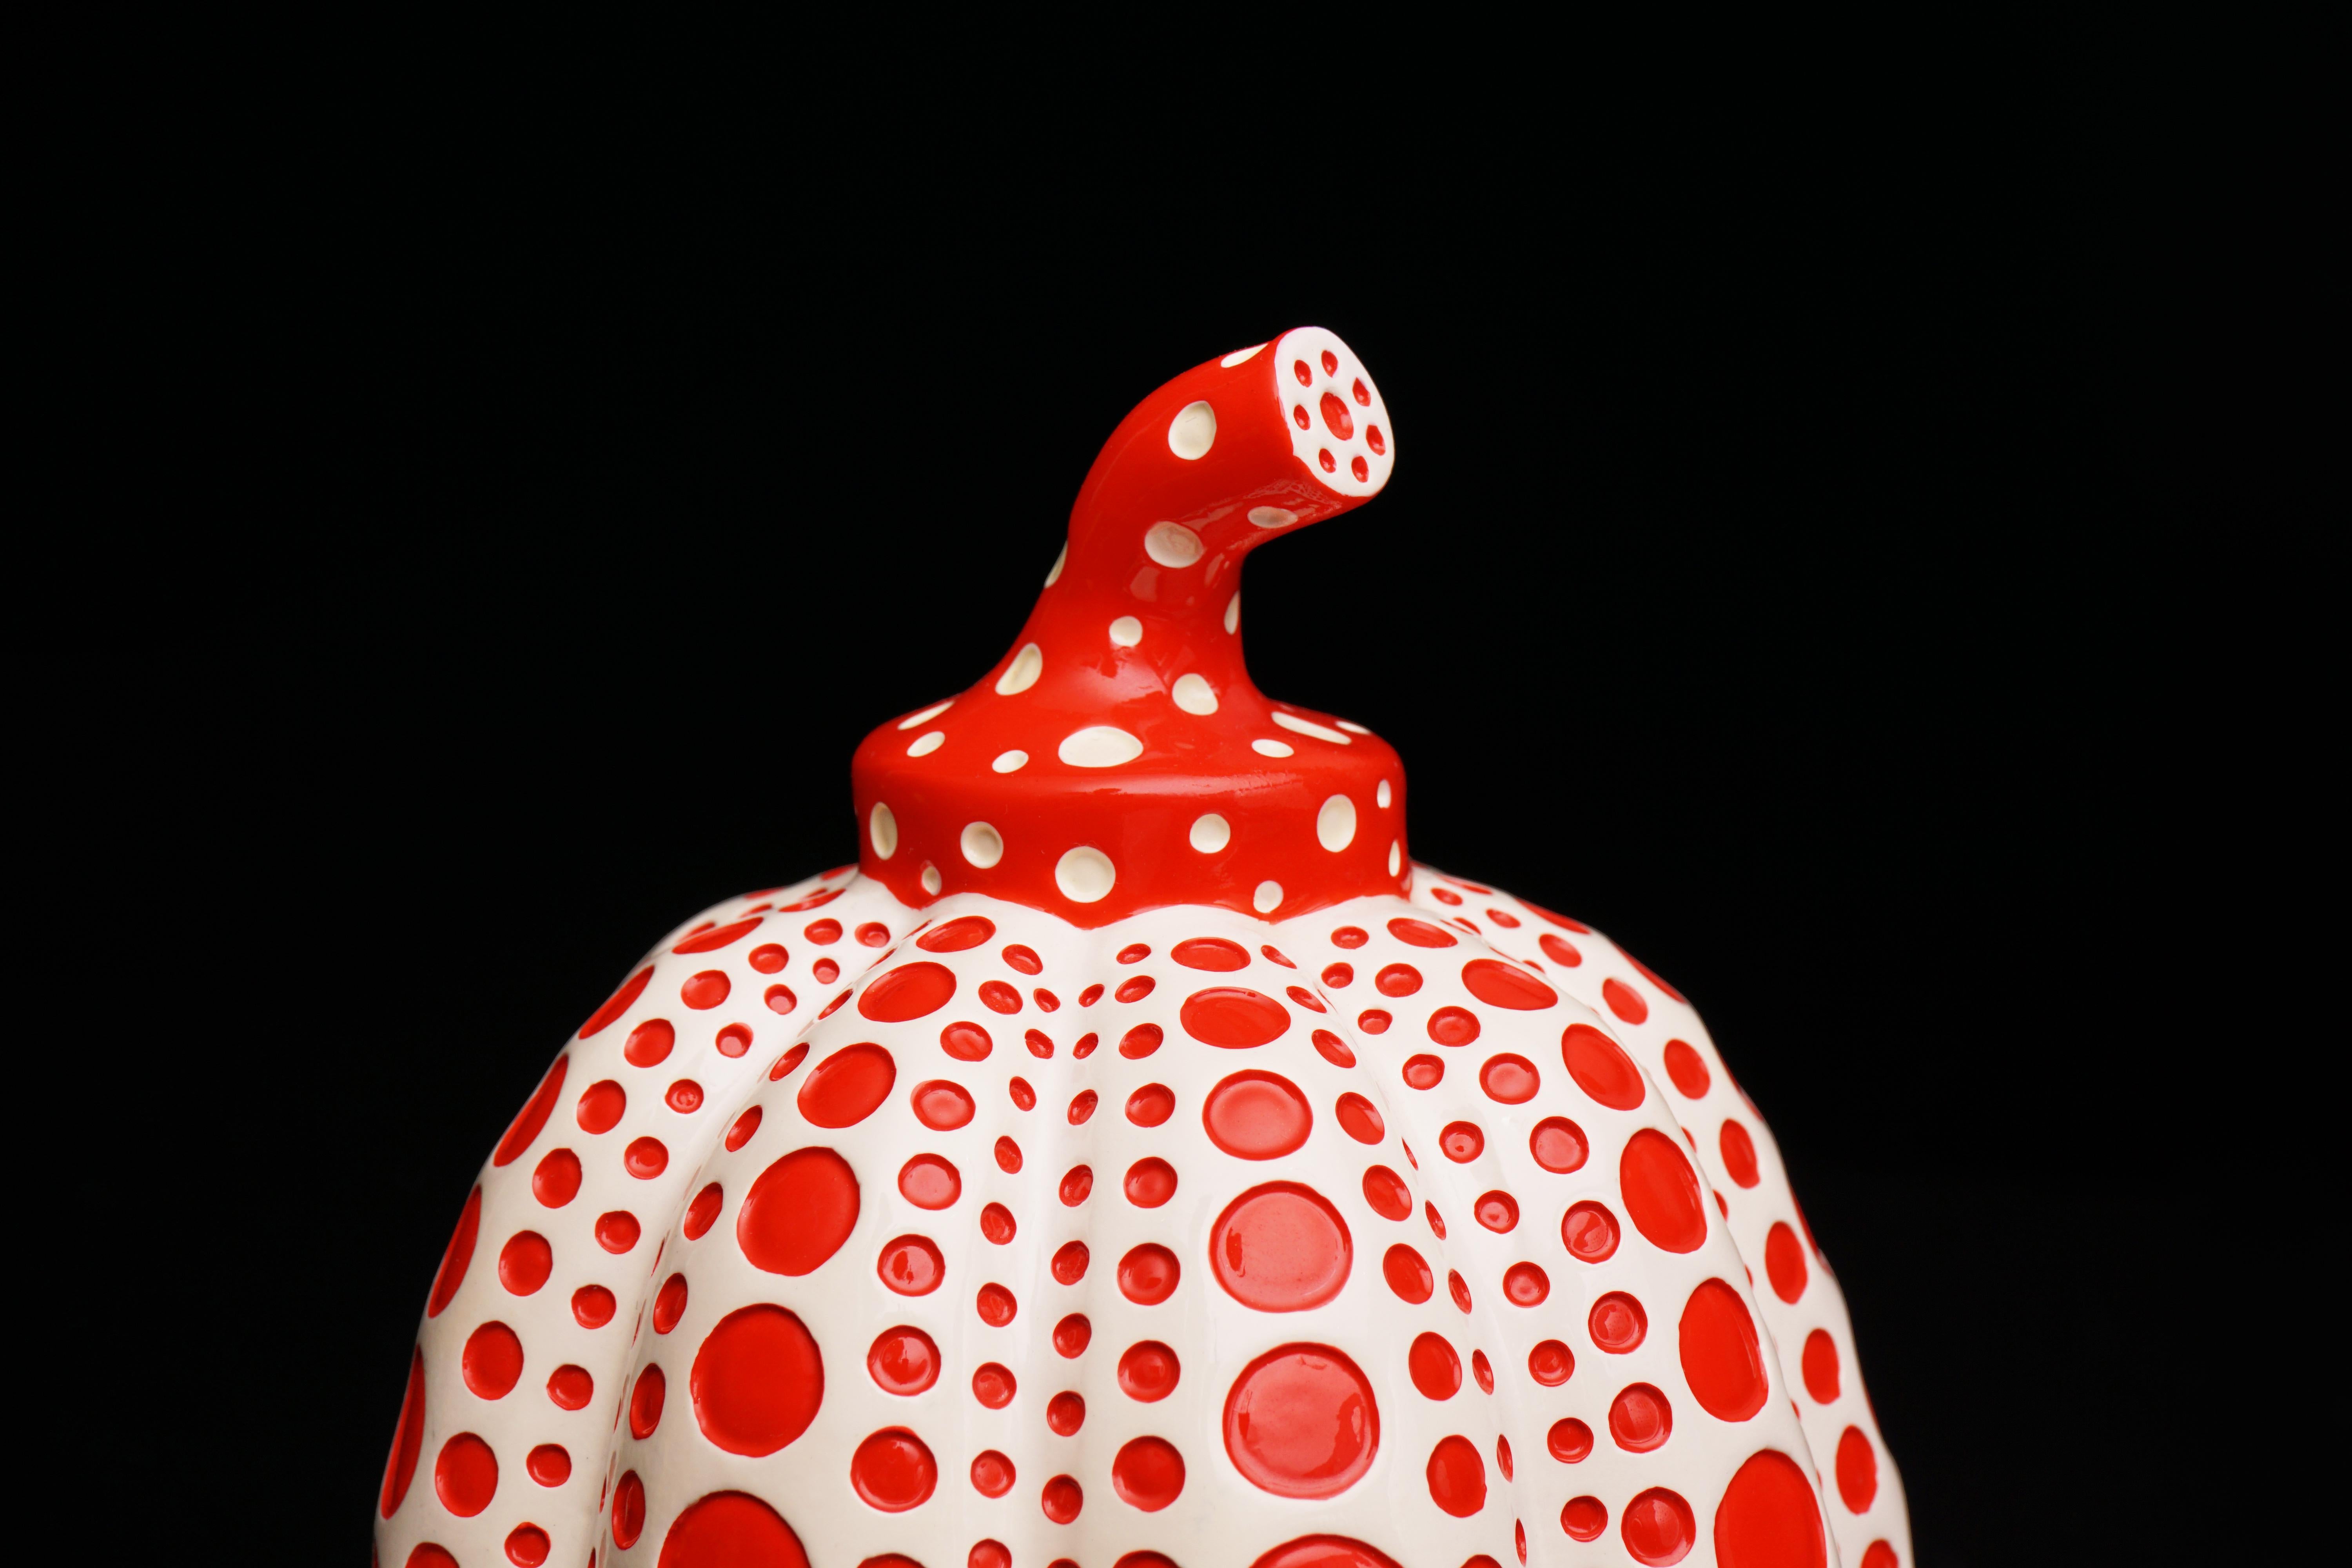 Yayoi Kusama, 'Pumpkin' White/Red, Collectable Resin Sculpture, 2016 1